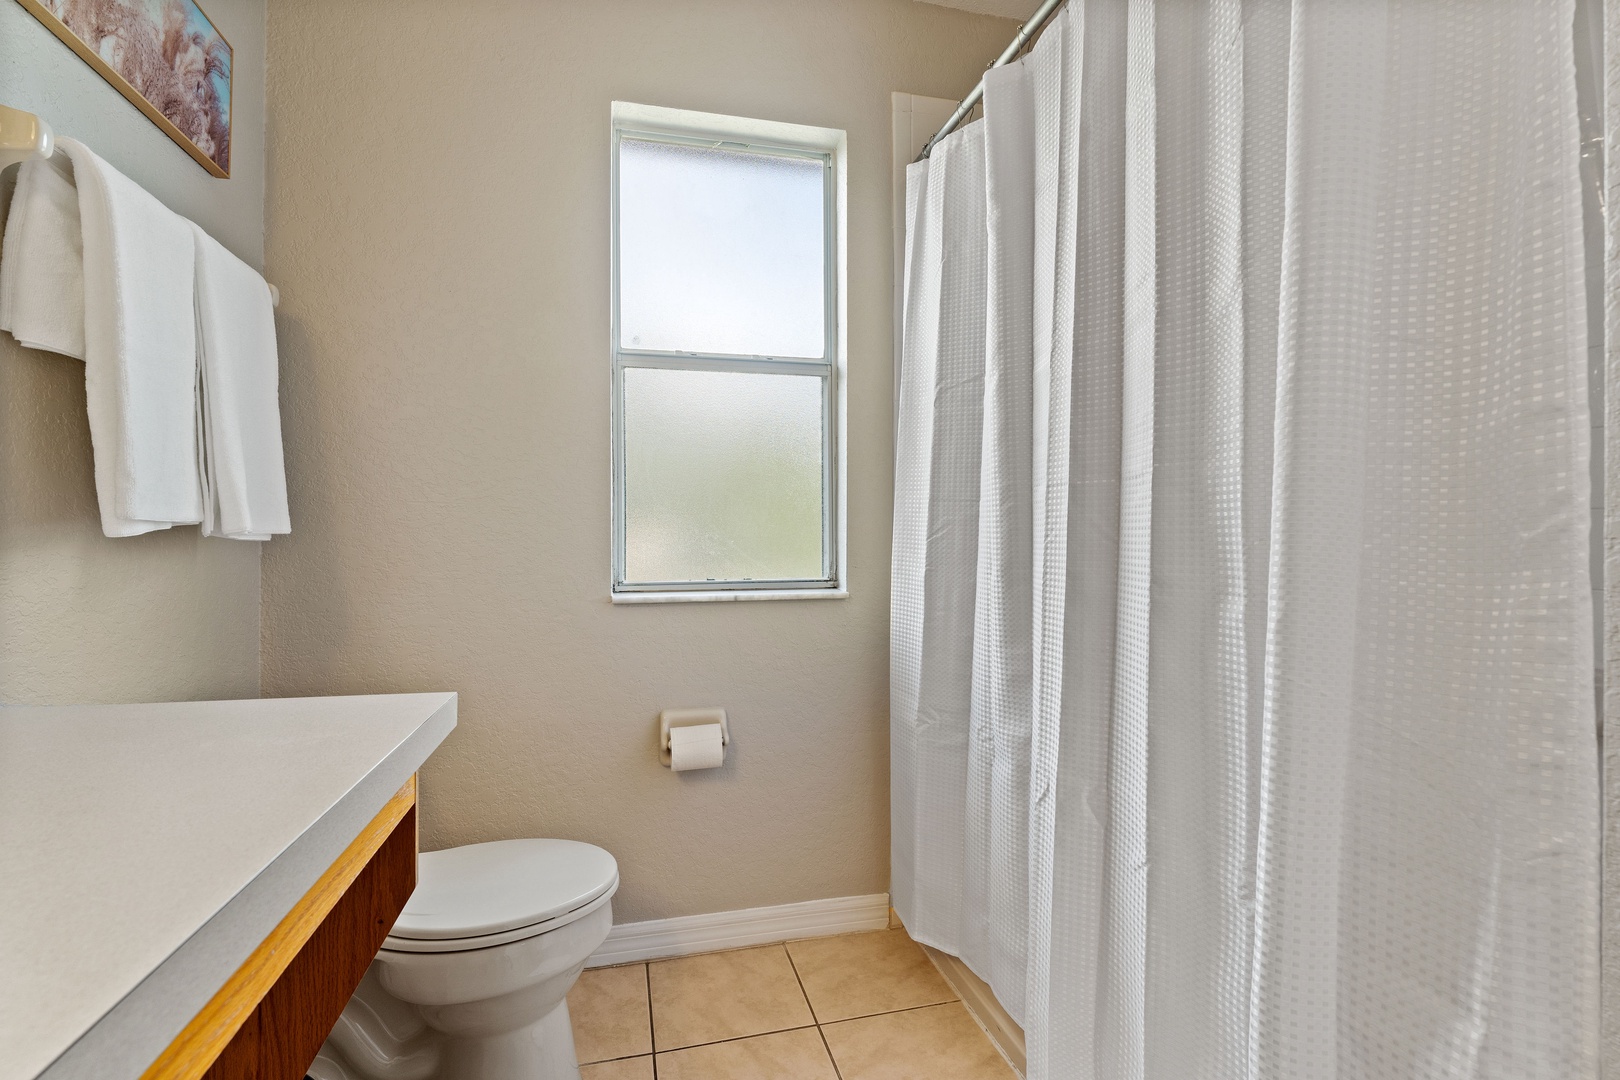 The king en suite offers a single vanity & shower/tub combo